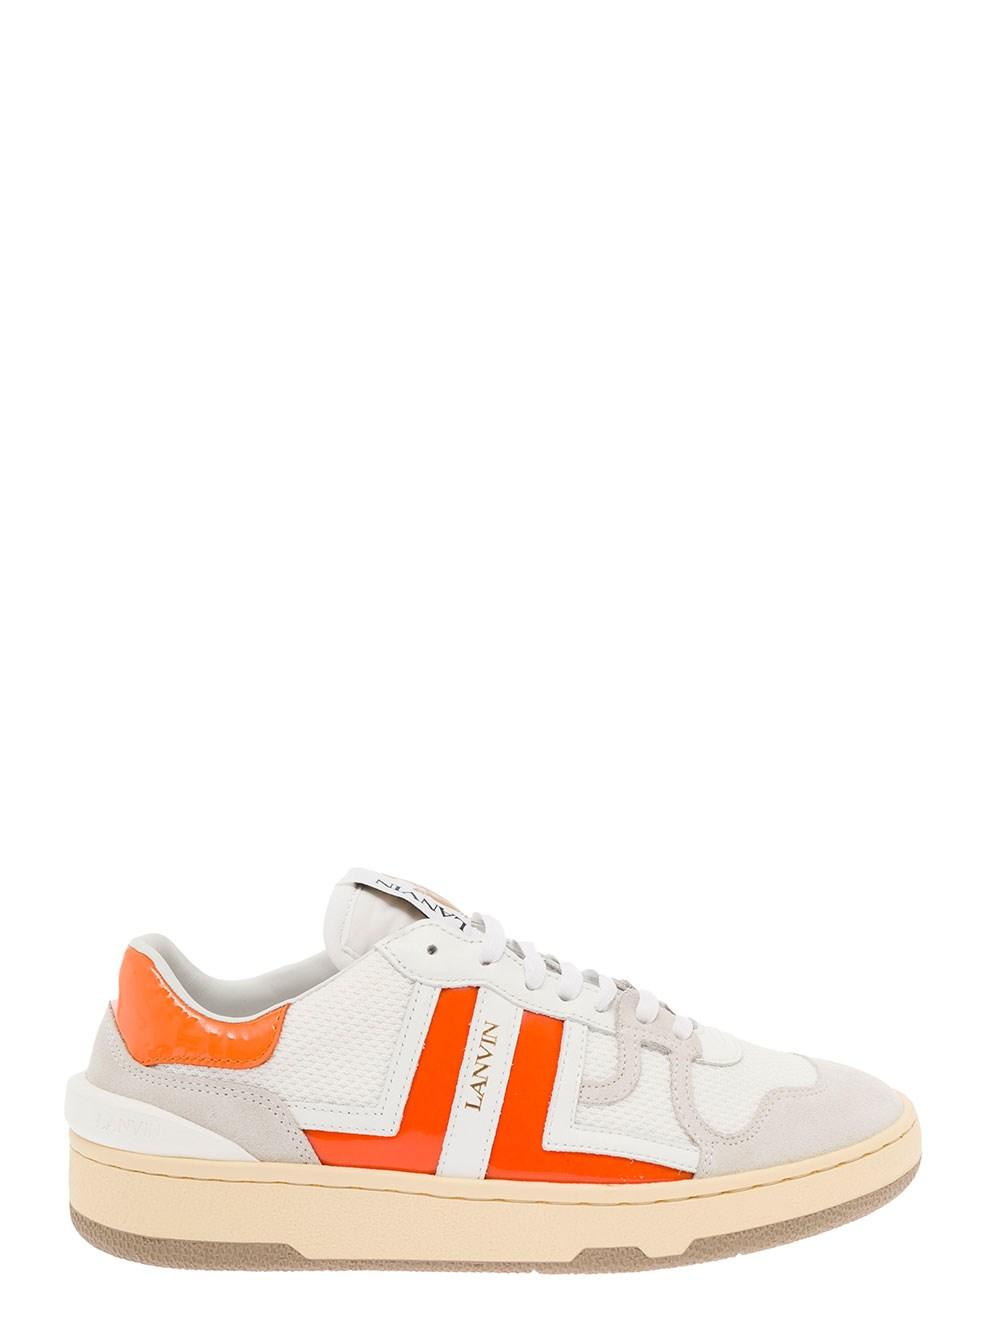 Skole lærer ankomst Pjece Lanvin Clay Low And Orange Leather And Mesh Sneaker in White | Lyst